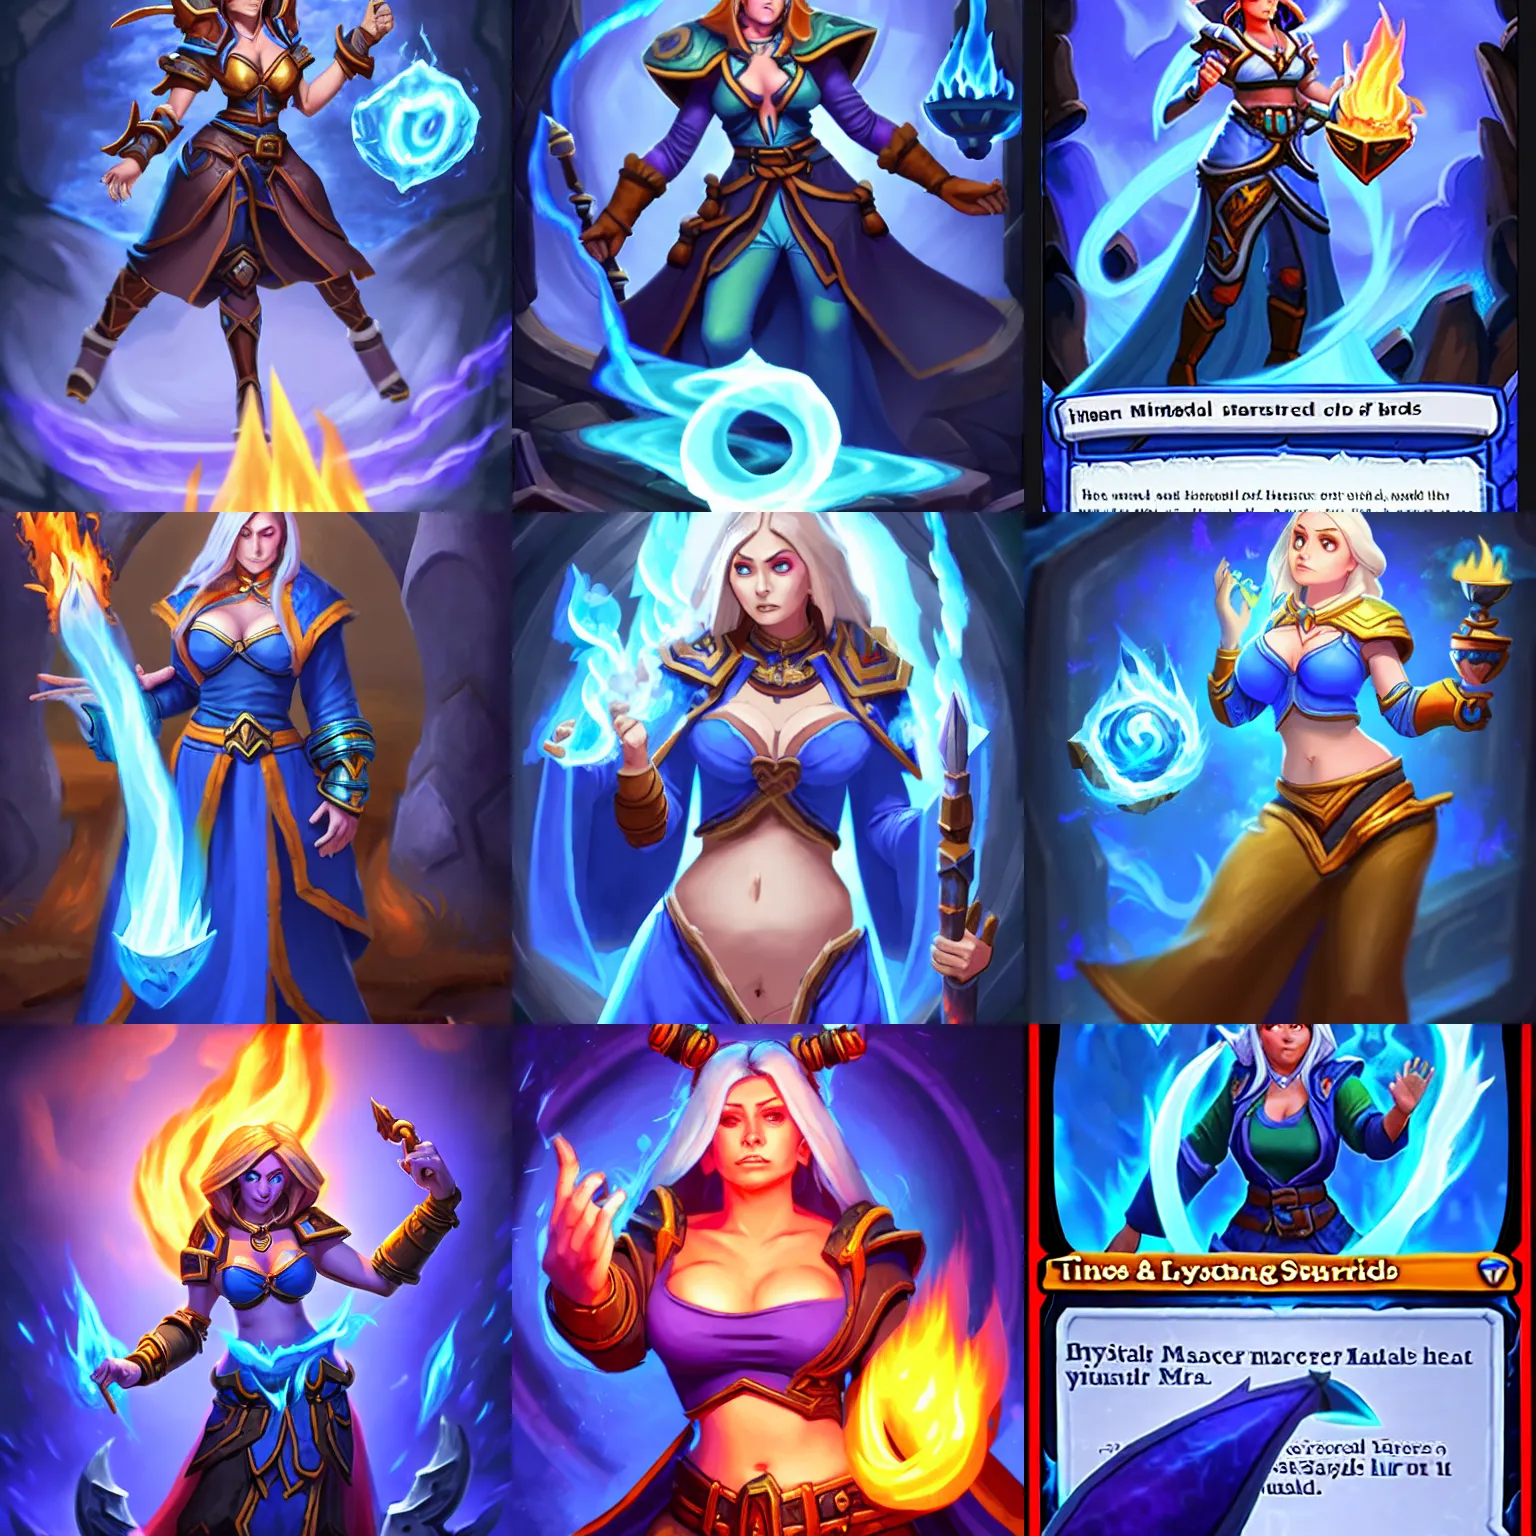 Prompt: Physical : tinyest midriff ever, largest haunches ever, fullest body, small head, SFW huge breasts; Who : a female mage with a blue robe casting a fire spell; Hugely important : Hearthstone official splash art, SFW, perfect master piece, award winning